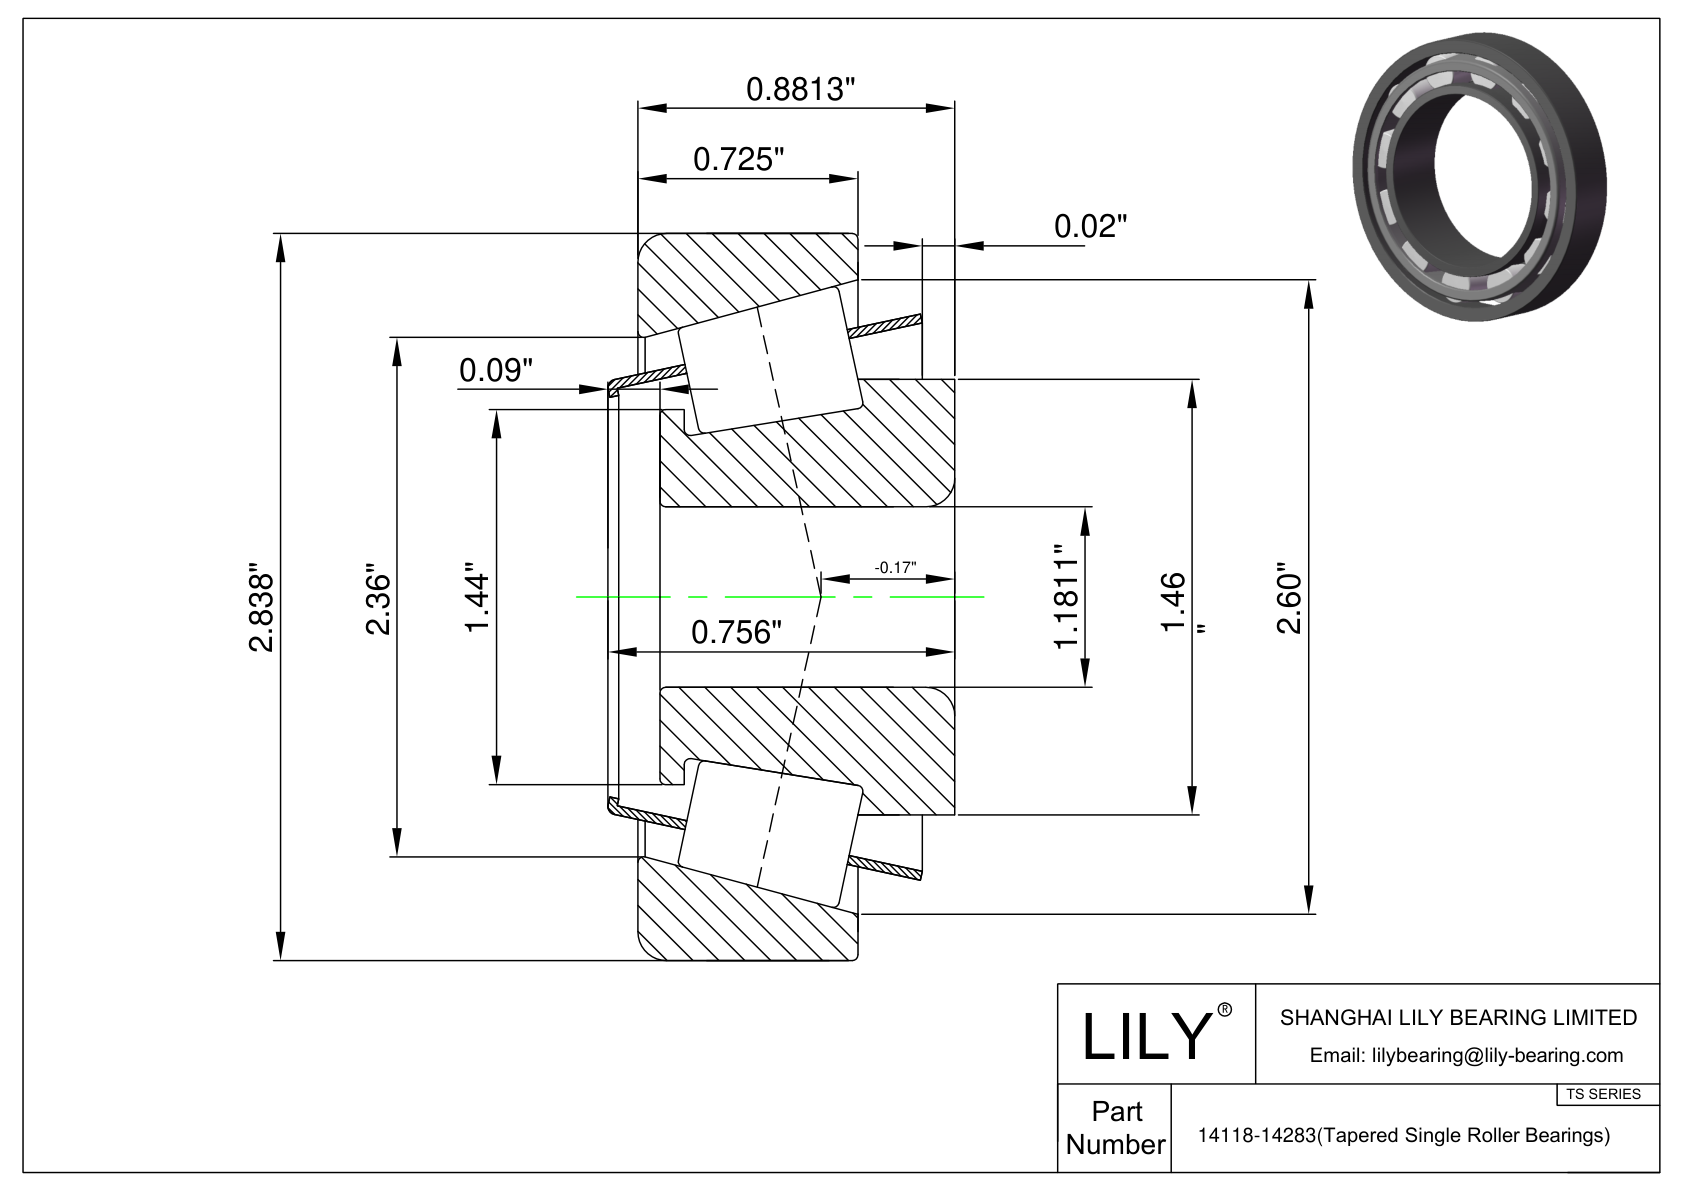 14118-14283 TS (Tapered Single Roller Bearings) (Imperial) cad drawing